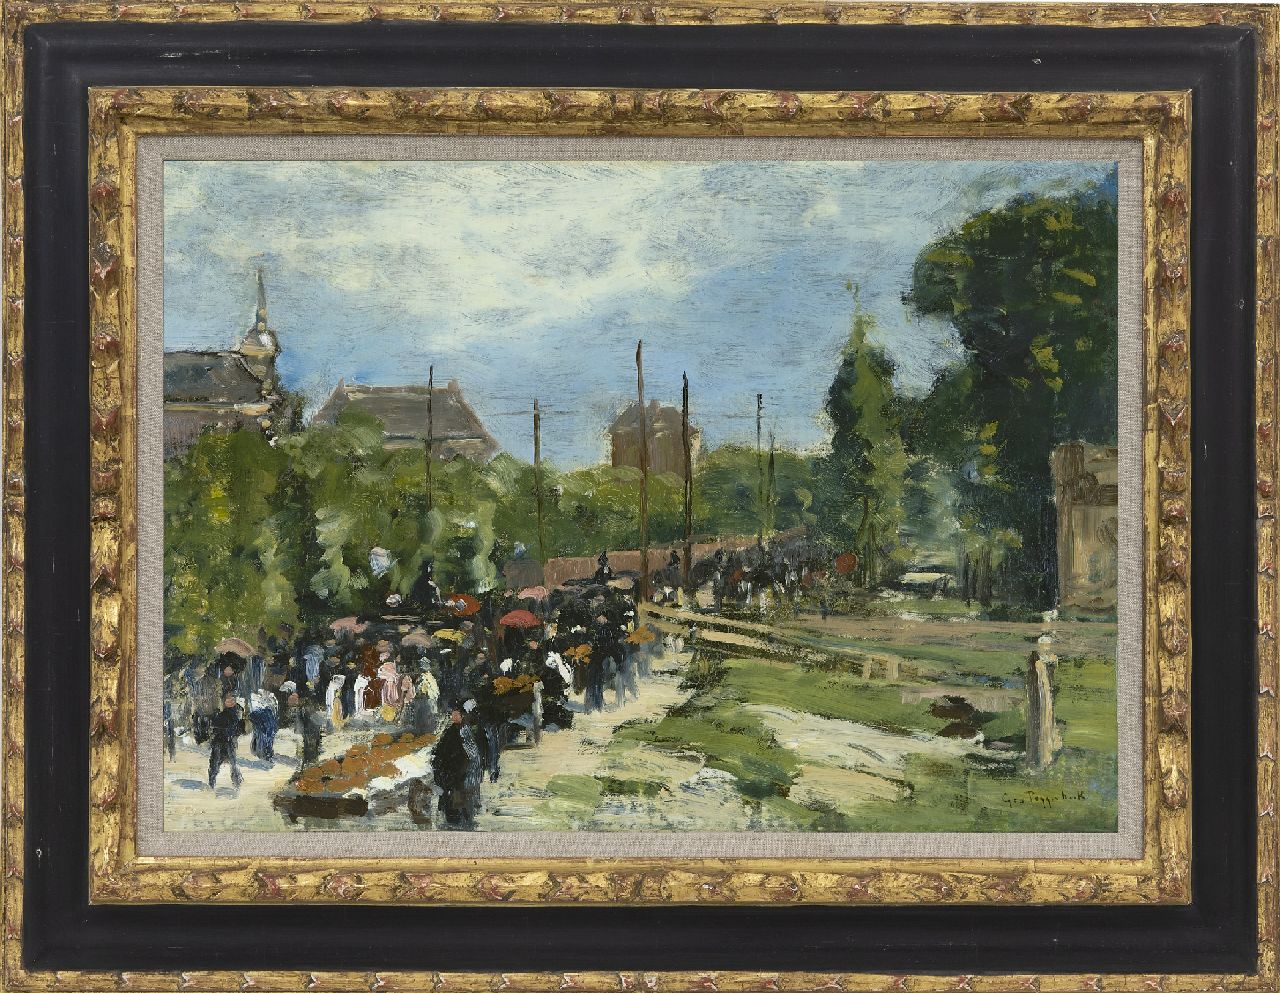 Poggenbeek G.J.H.  | George Jan Hendrik 'Geo' Poggenbeek | Paintings offered for sale | Procession in Amsterdam, oil on canvas 33.9 x 48.2 cm, signed l.r.